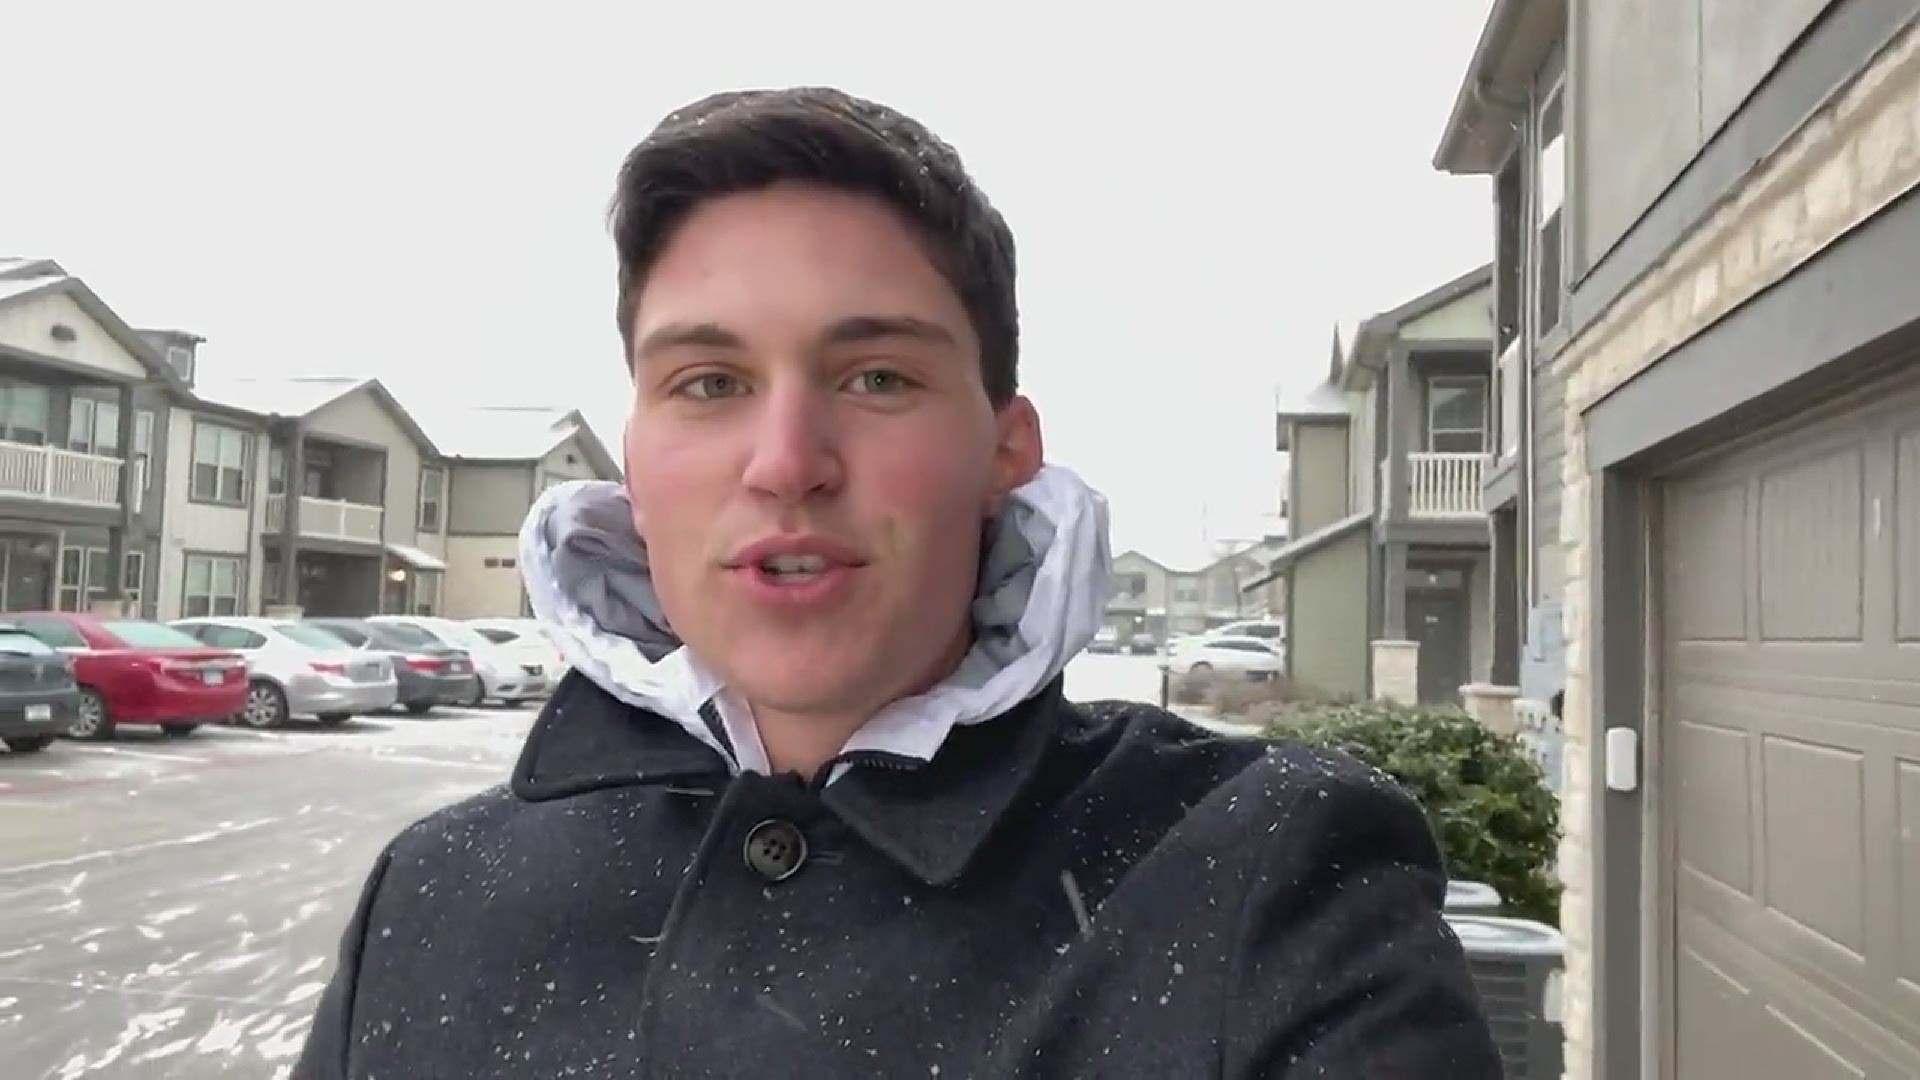 6 News Matt Lively gives us an update on weather in Waco, Texas Sunday evening. Snow flurries are starting to come down and roads are icy.
Credit: Matt Lively - 6News